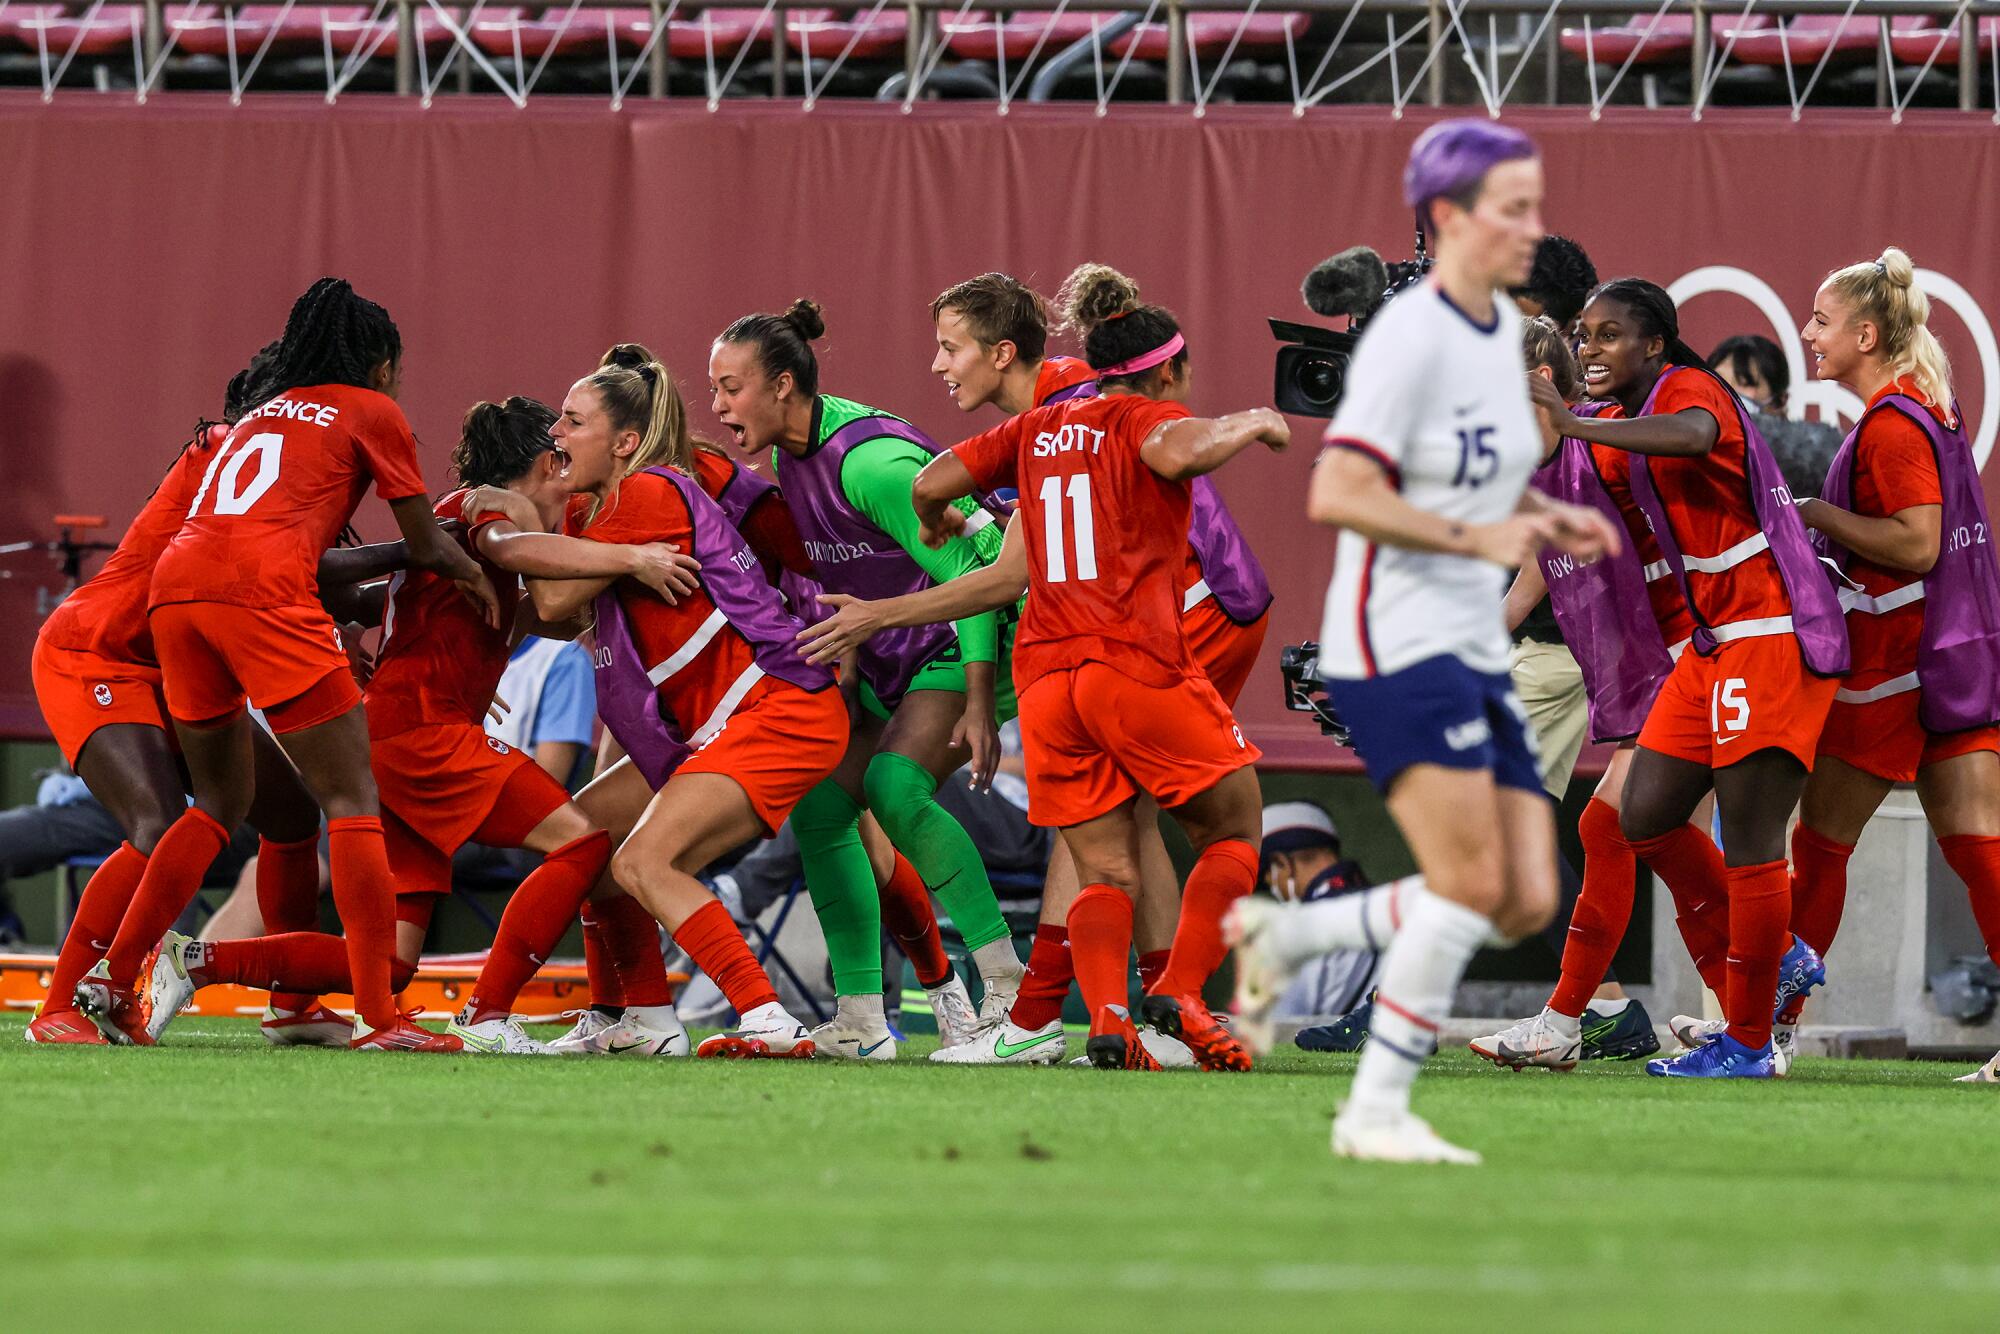 Teammates swarm Team Canada midfielder Jessie Fleming after she scored on a penalty kick for a 1-0 lead over USA.